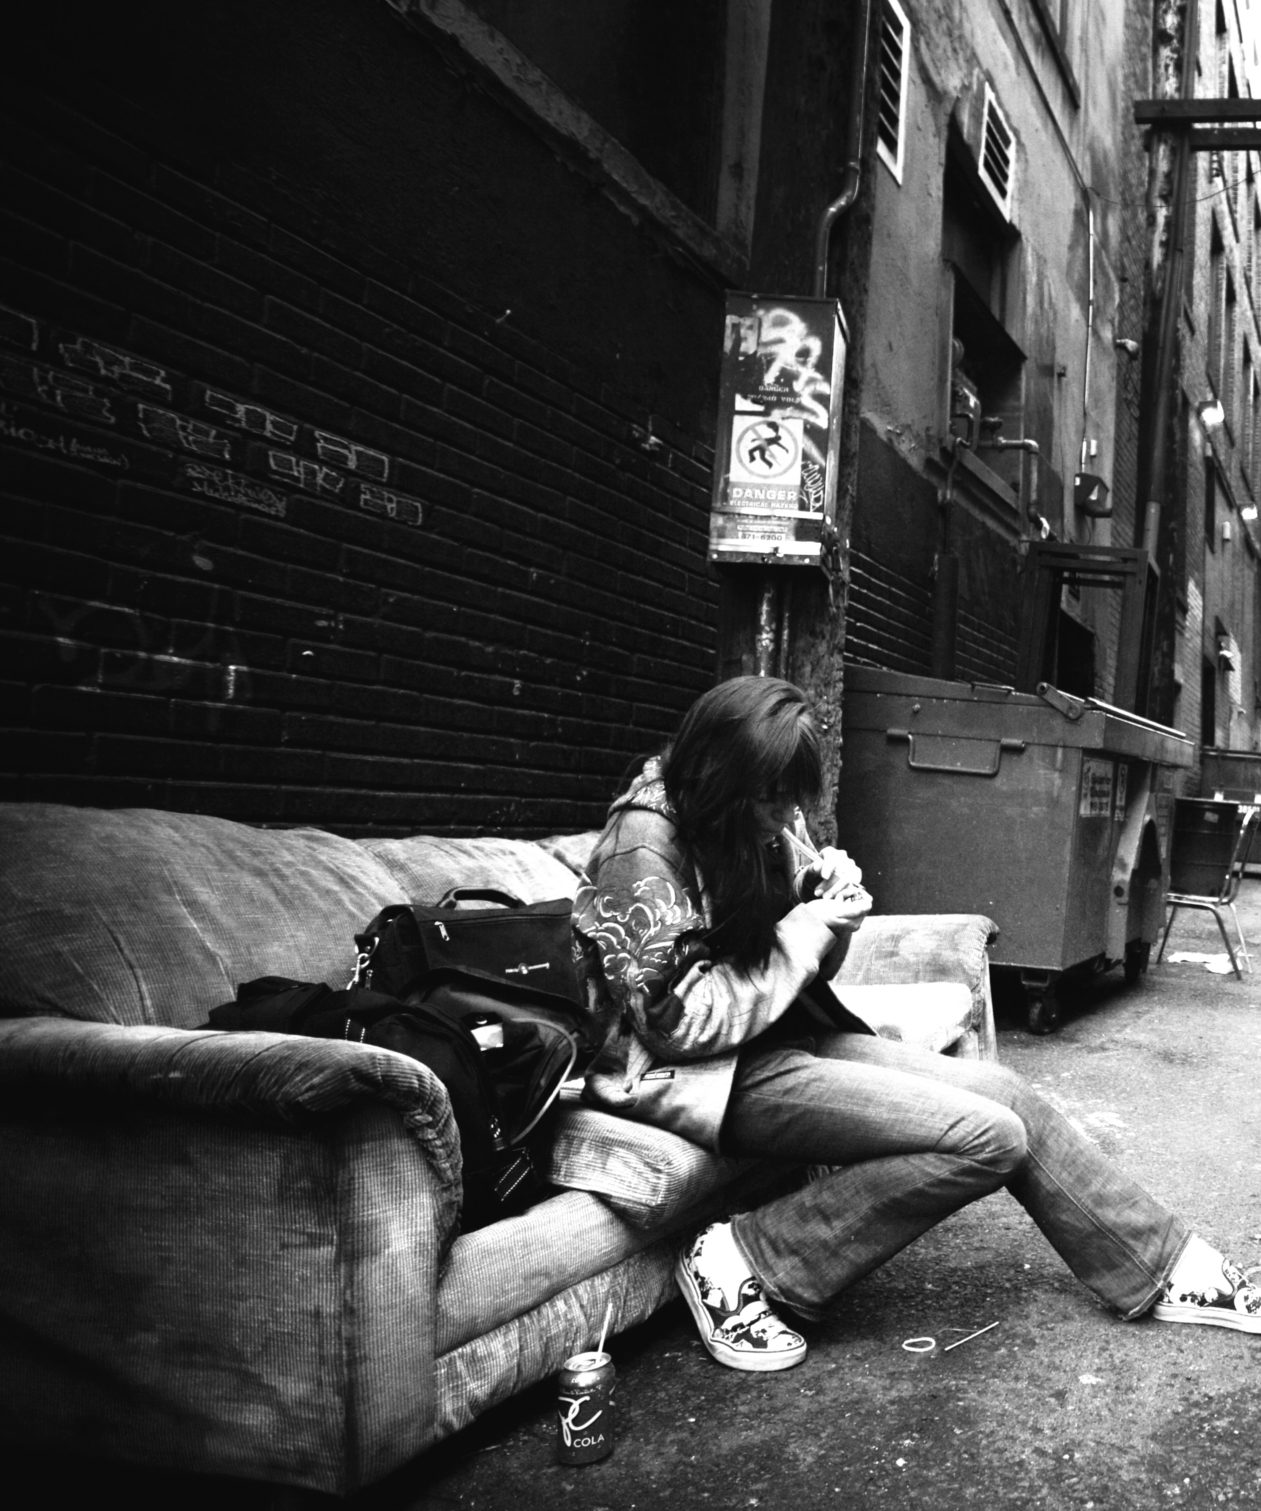 Woman on couch in alley